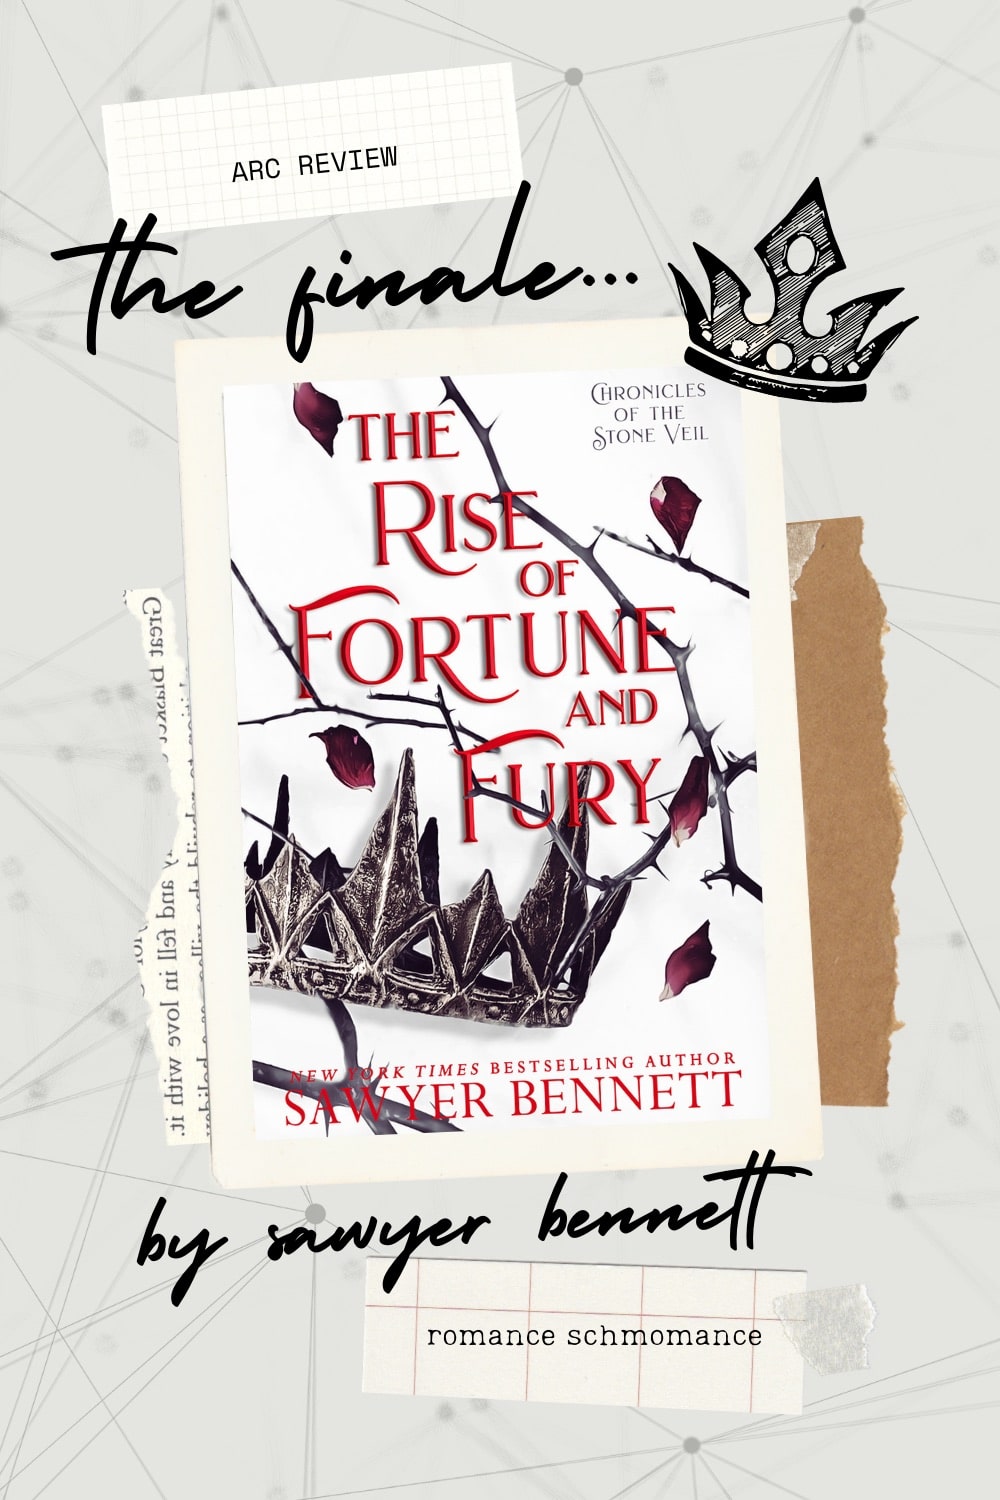 Romance Schmomance | Book Review : The Rise of Fortune and Fury by Sawyer Bennett